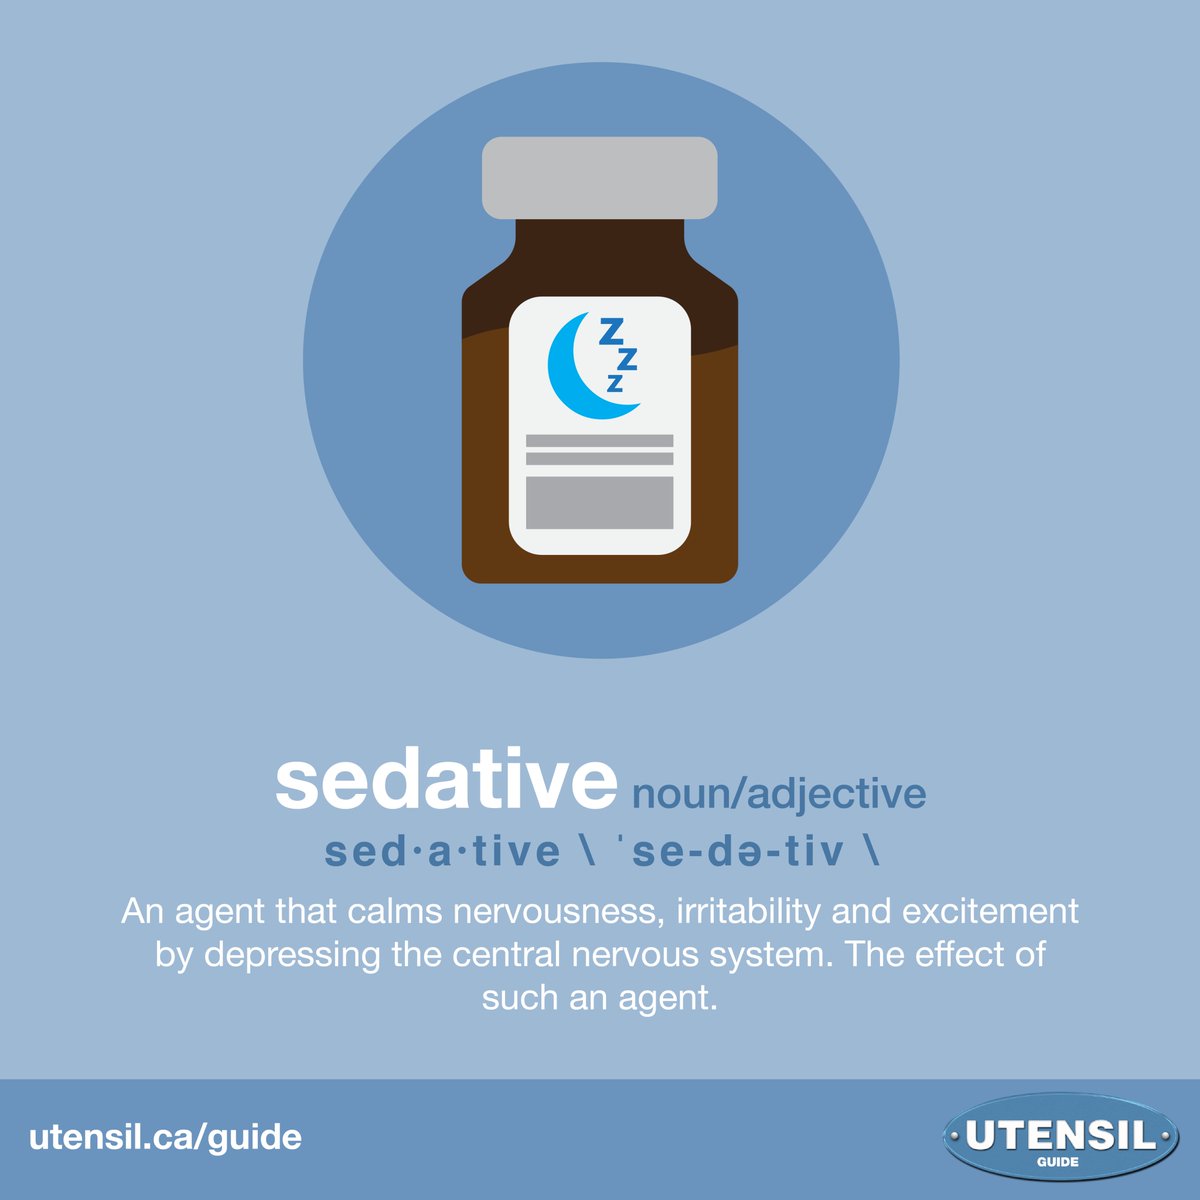 SEDATIVE (noun/adjective) An agent that calms nervousness, irritability and excitement by depressing the central nervous system. The effect of such an agent. #UtensilGuide #CdnAg #CdnFood Learn more food & farming terms at: utensil.ca/guide